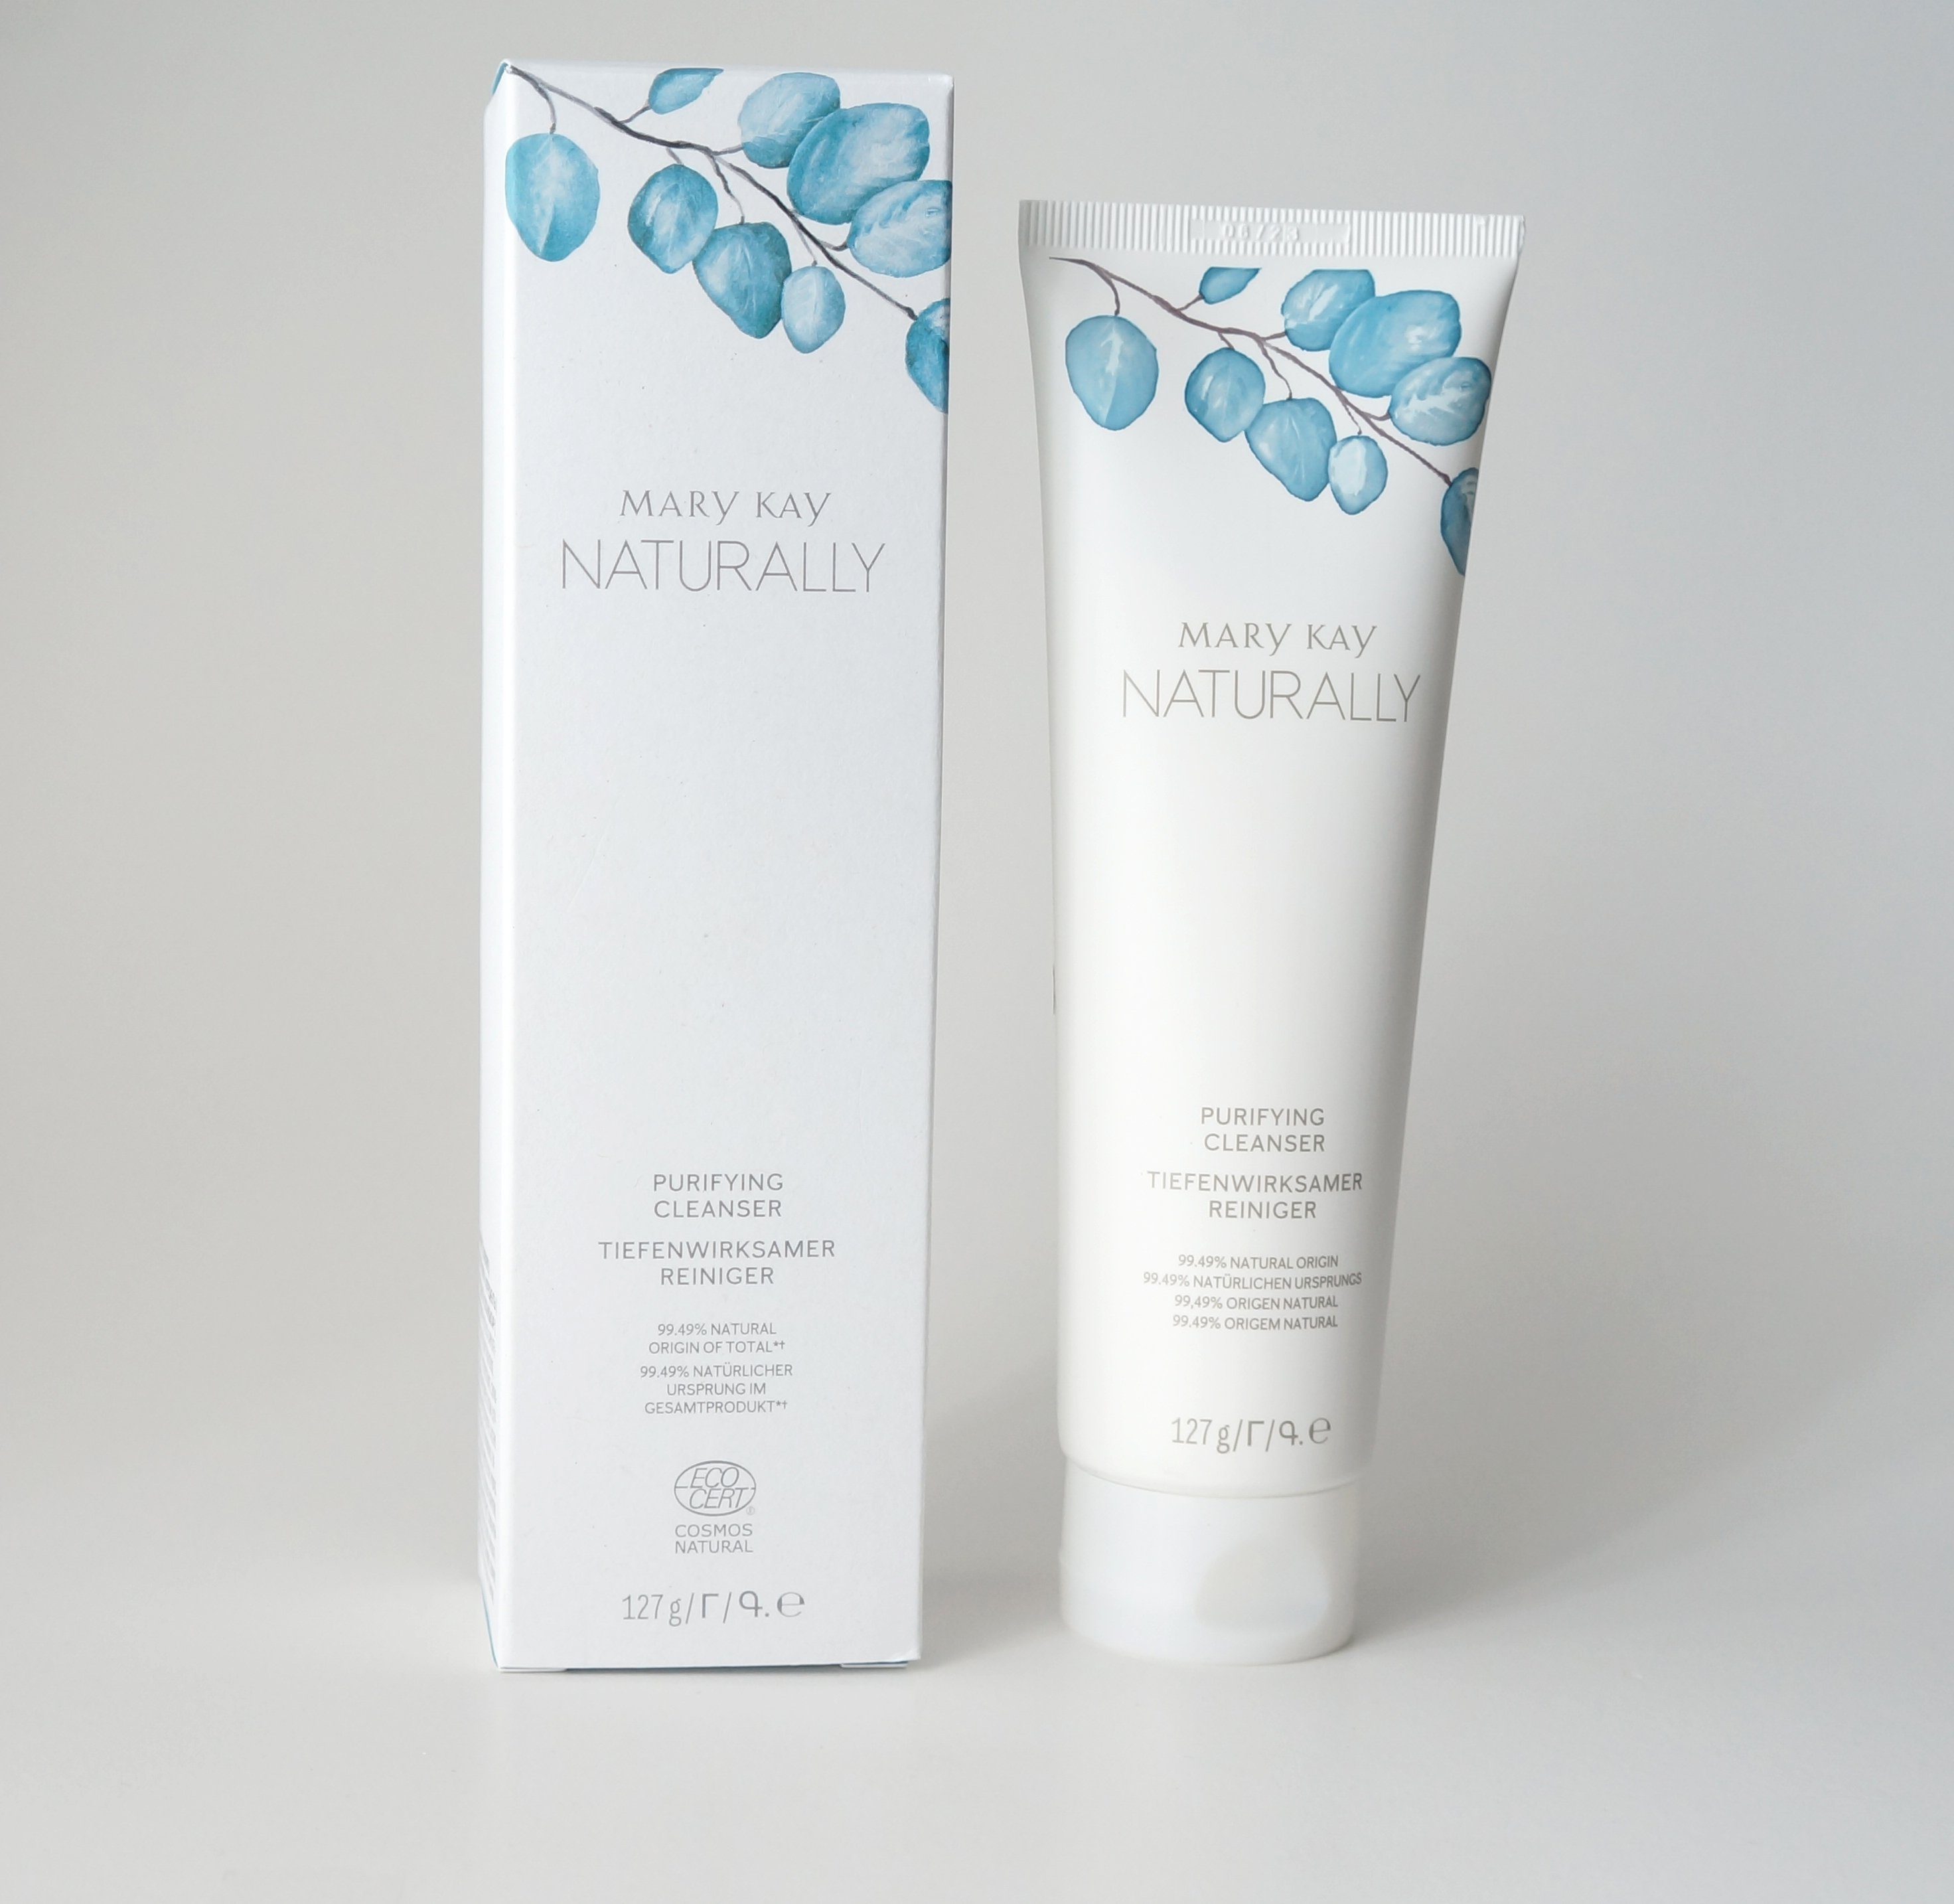 Mary Kay Gesichtspflege Mary Kay Naturally Purifying Cleanser Tiefenwirksamer Reiniger 127g